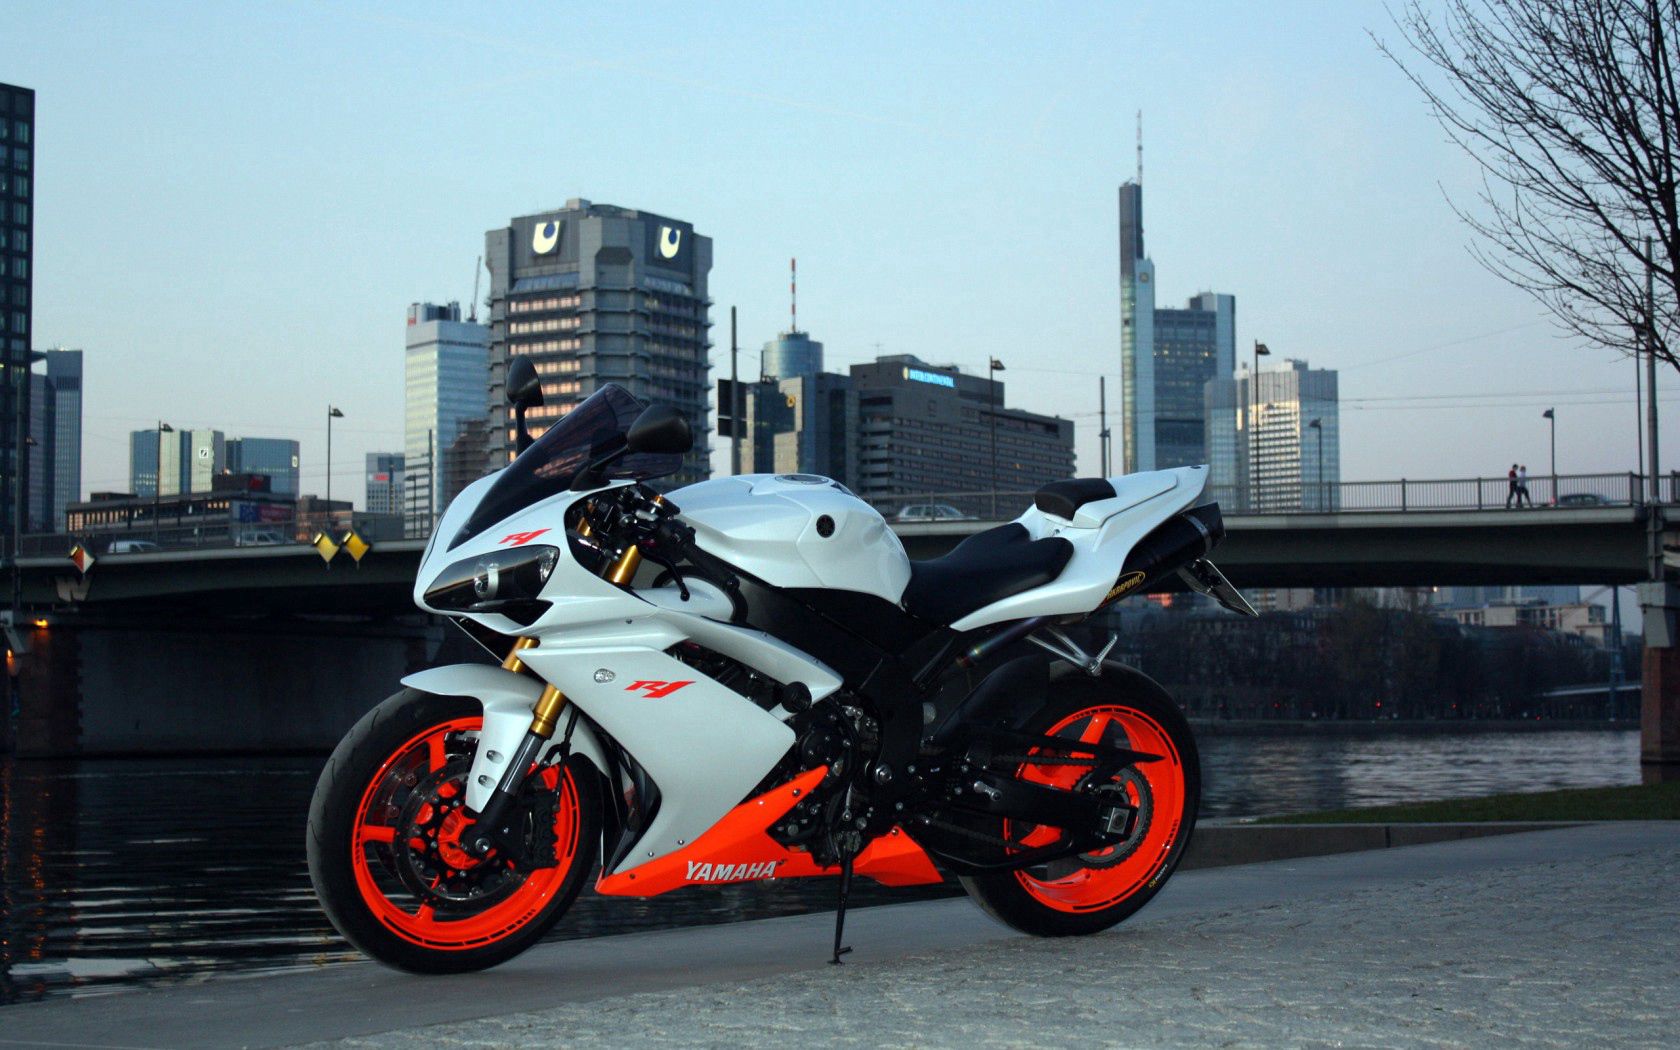 side view, r1, motorcycles, yamaha, city High Definition image